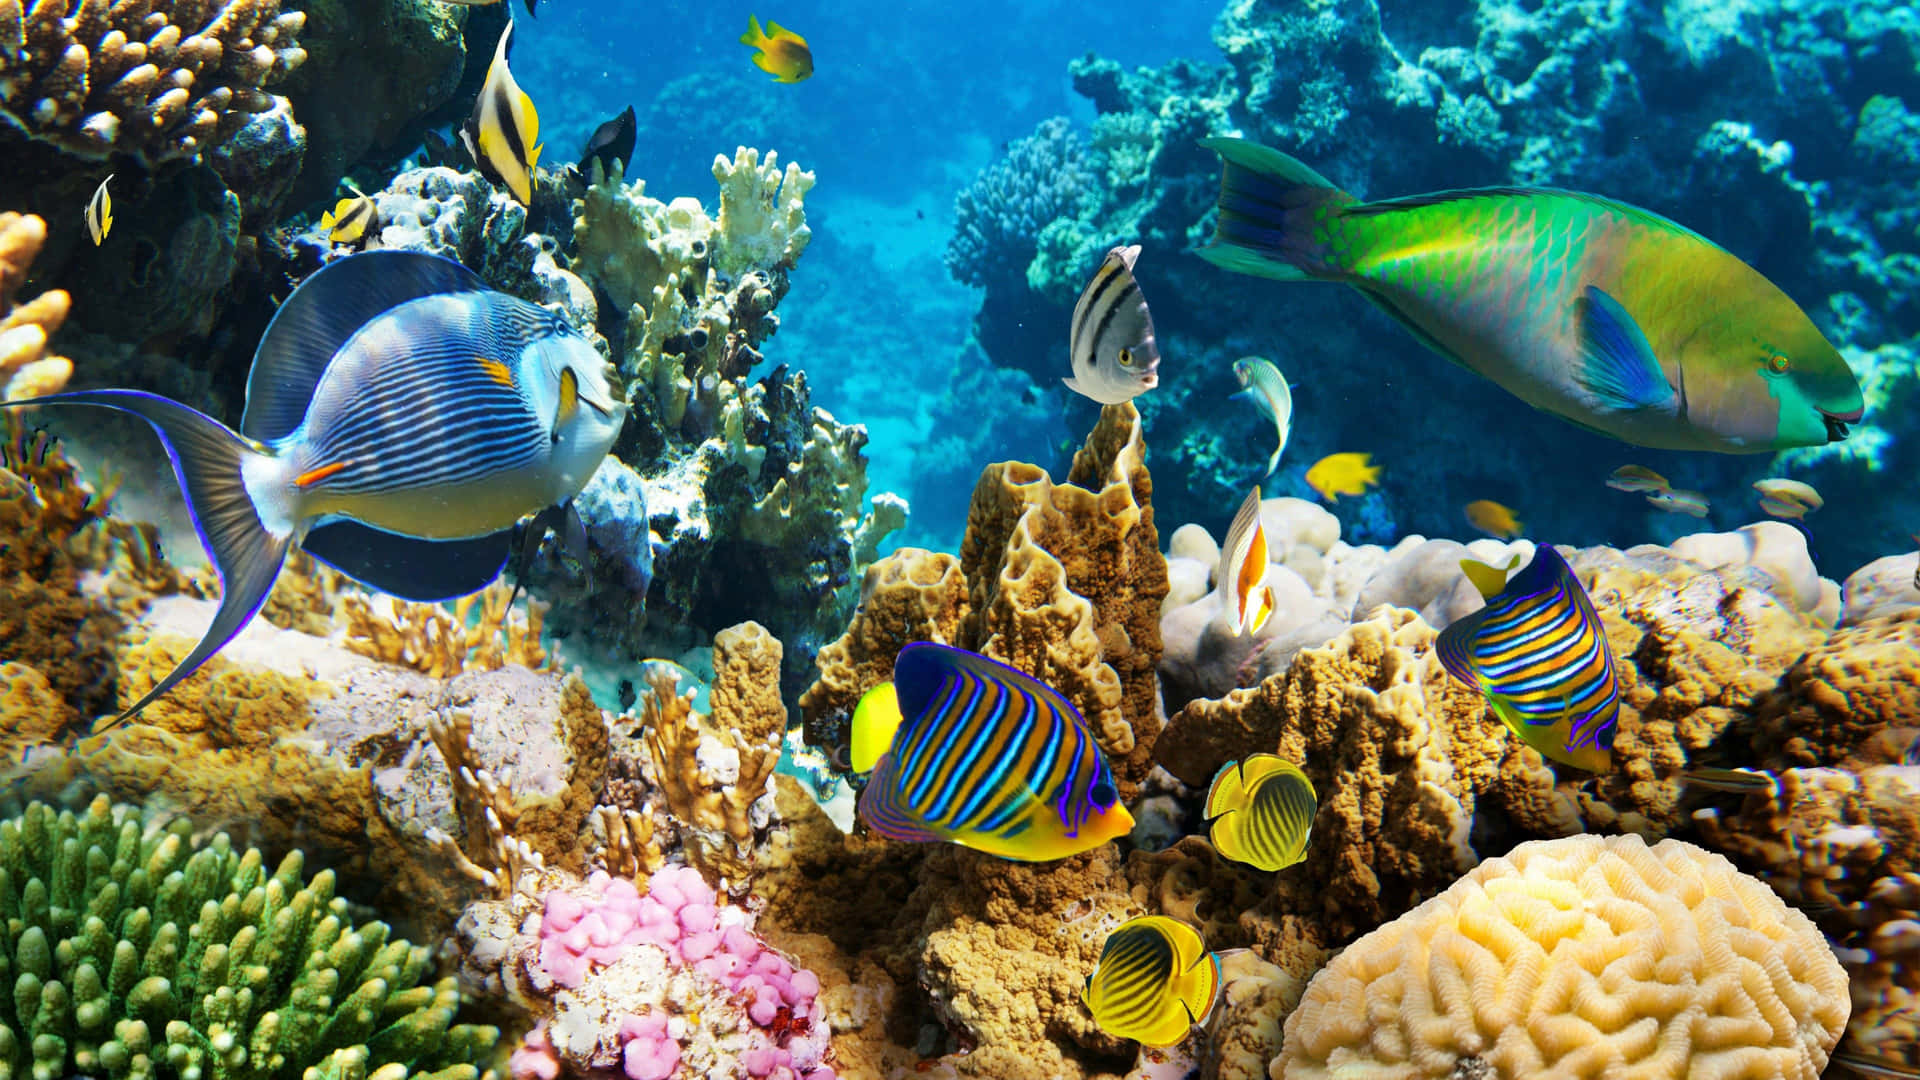 A Colorful Coral Reef With Many Fish Swimming Around